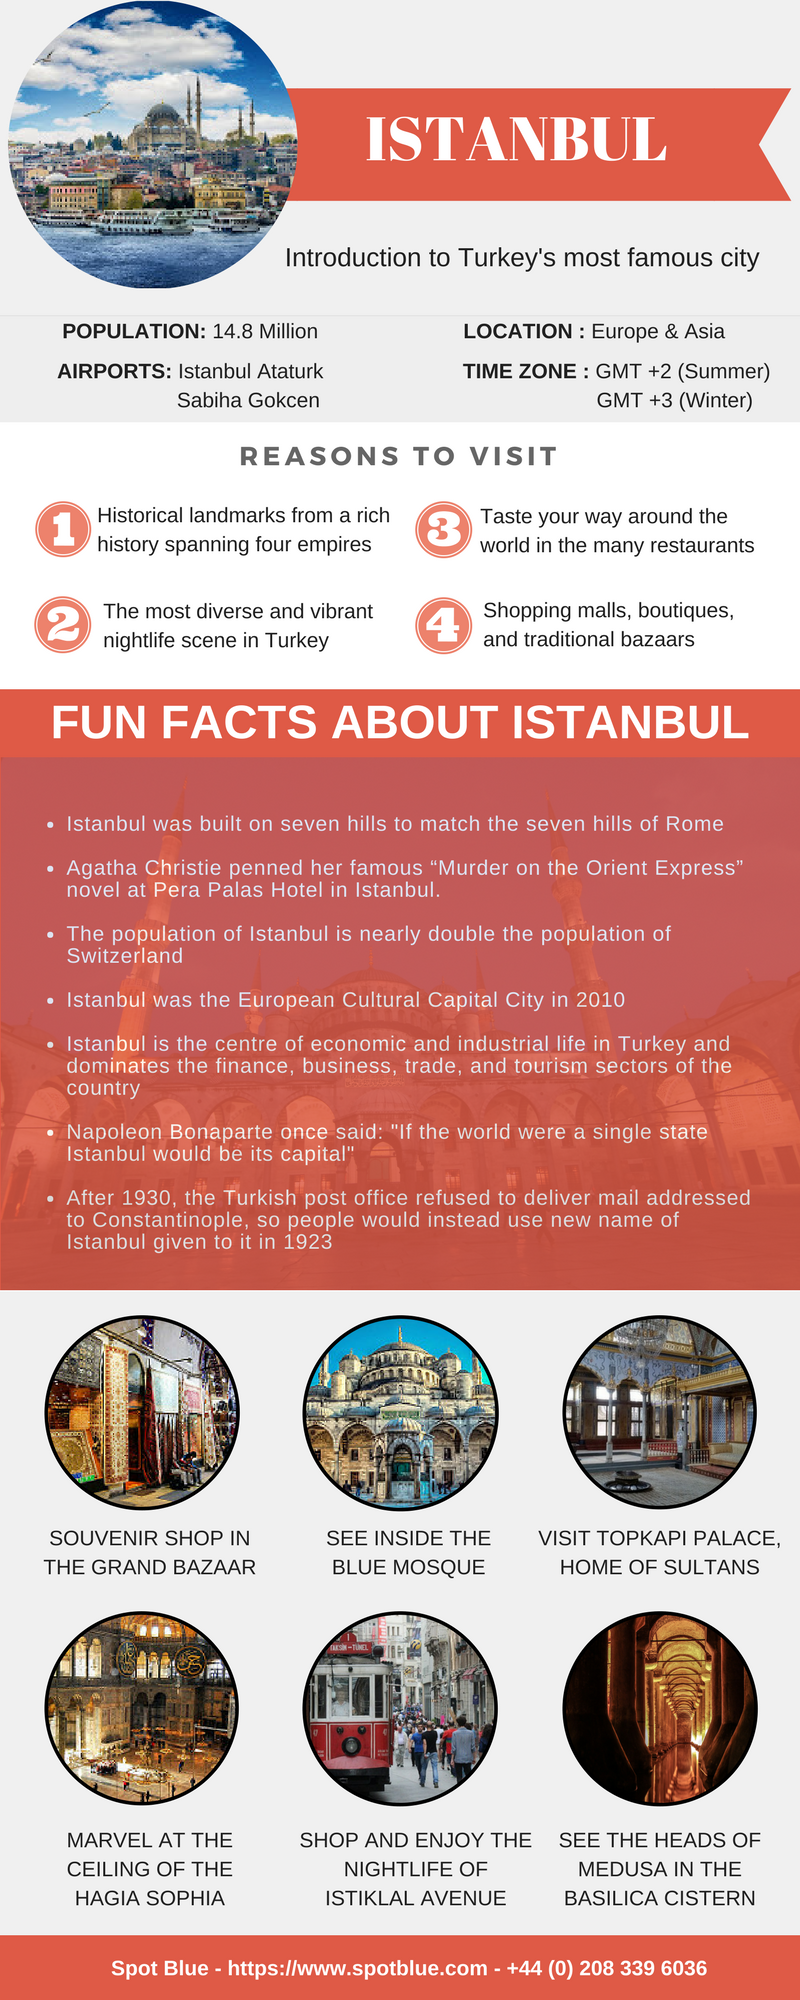 Introduction to Istanbul City in Turkey